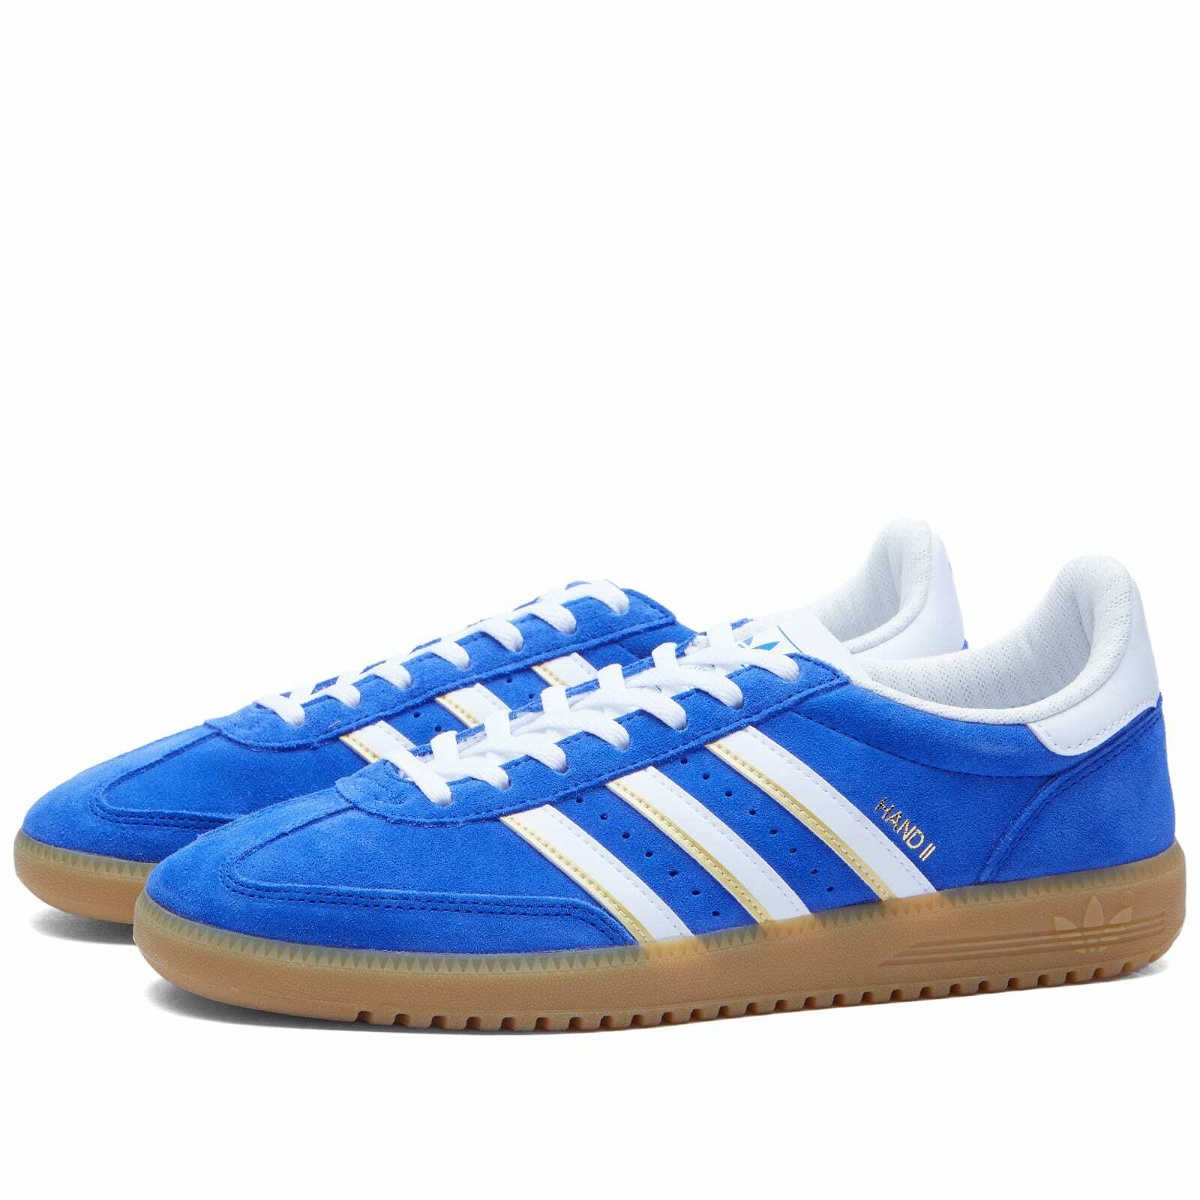 Adidas Hand 2 Semi in Lucid Blue/White Sneakers adidas